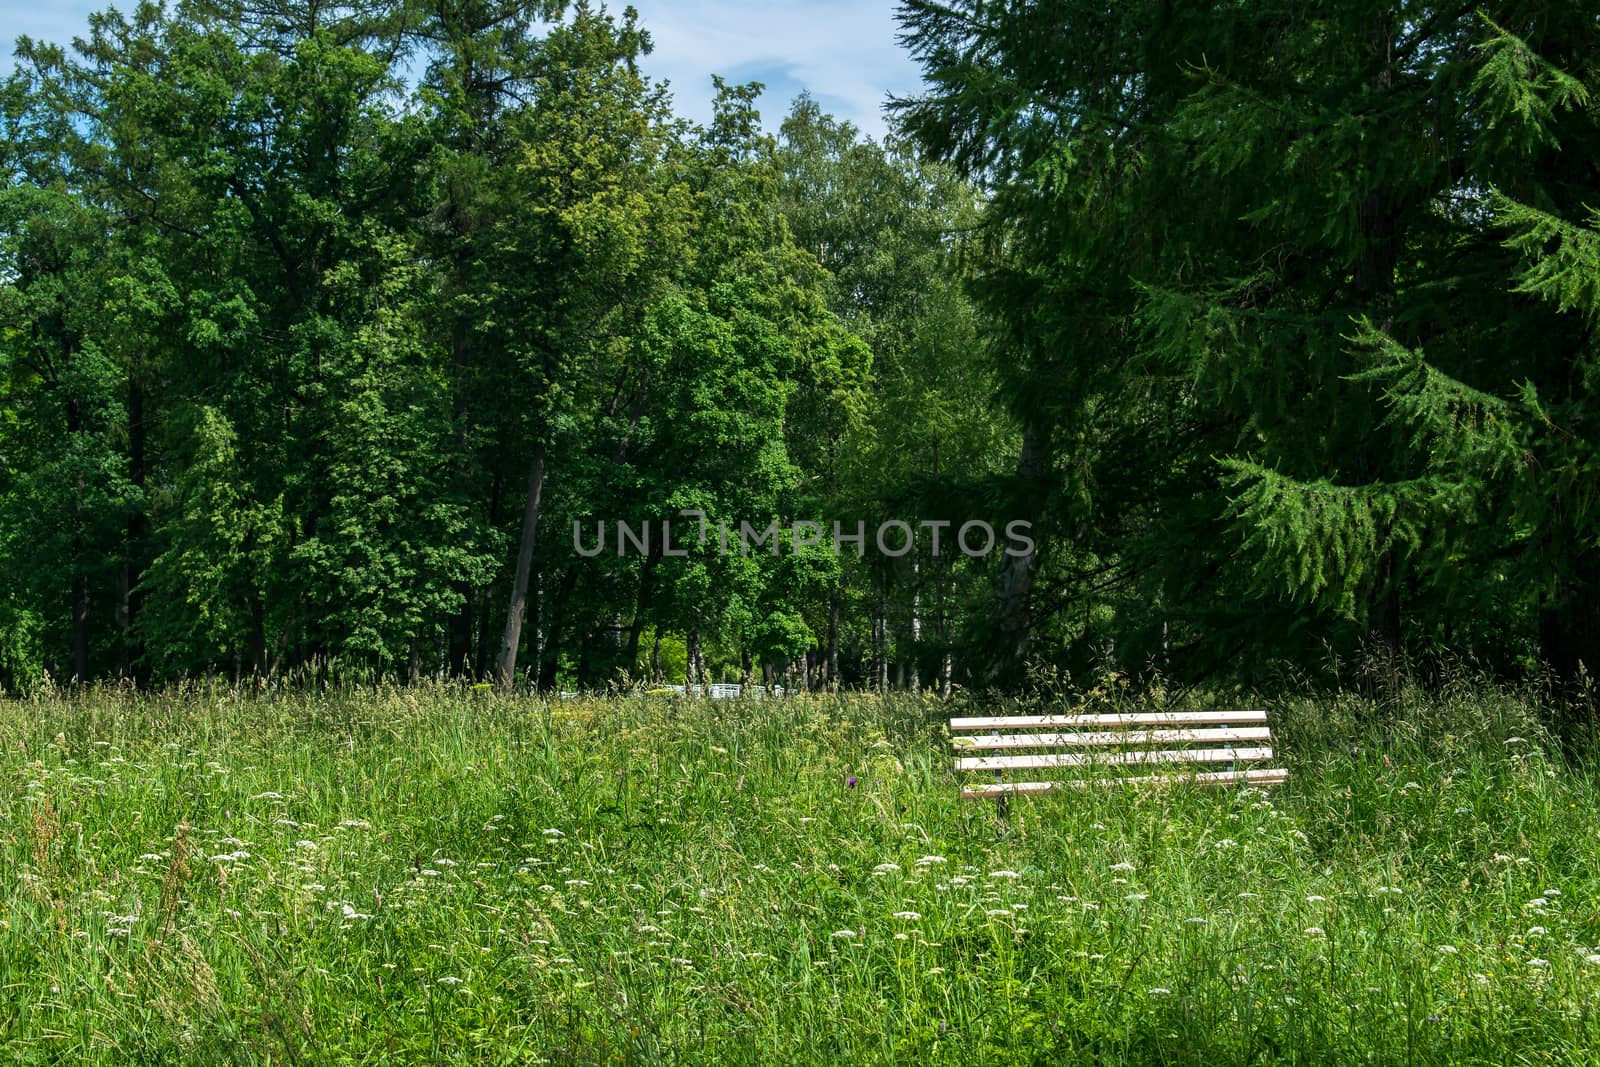 A lonely resting bench stands on a flowering meadow under an old spruce